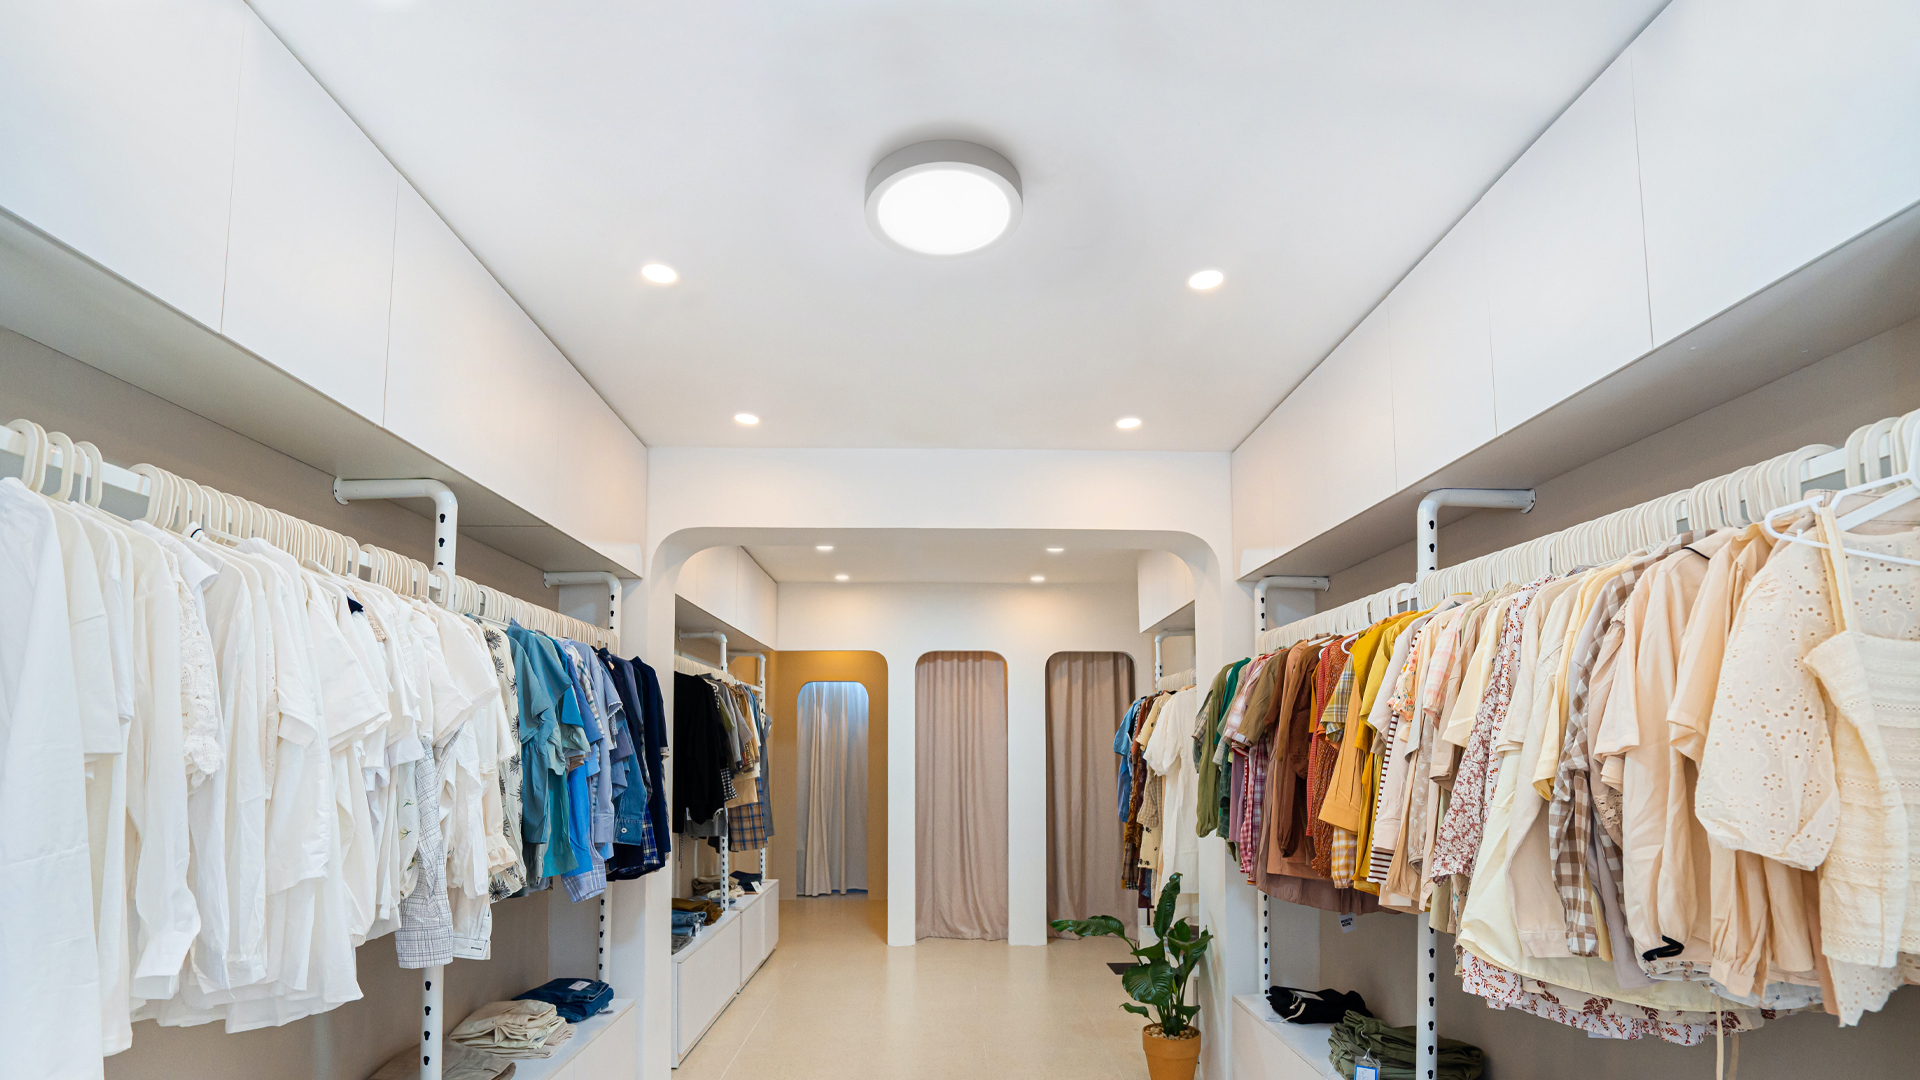 How to light a store: guide to choosing modern lamps